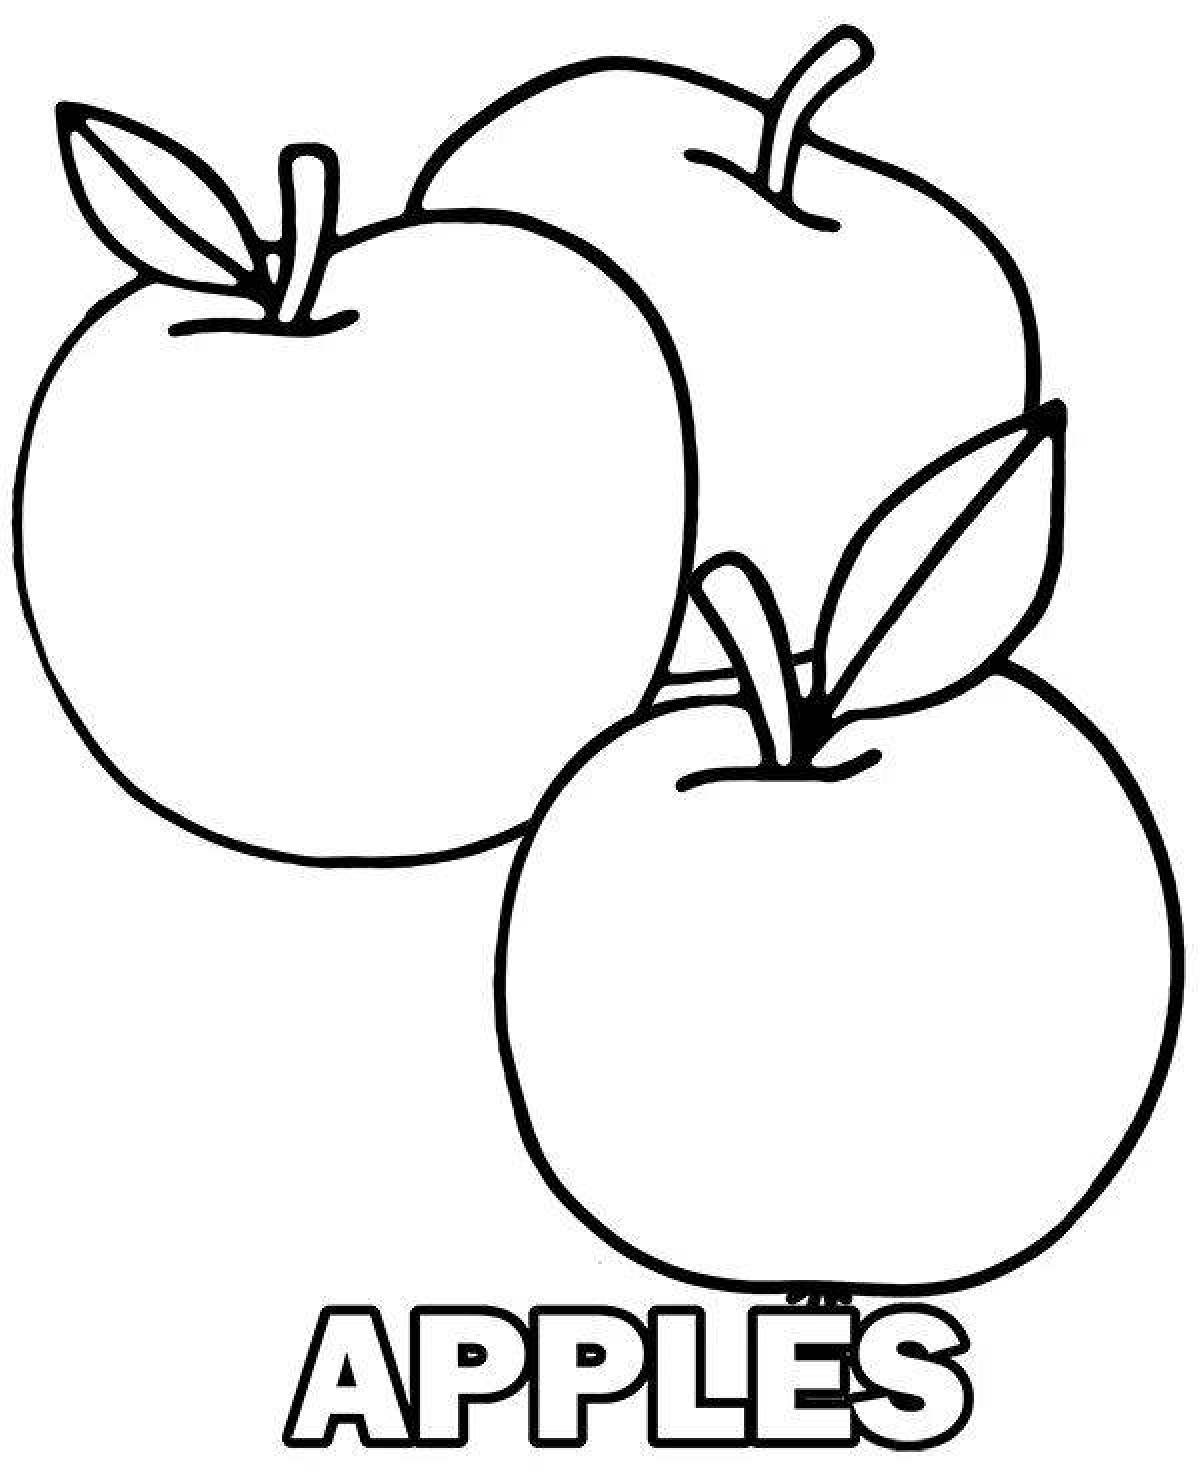 Fat apple coloring page